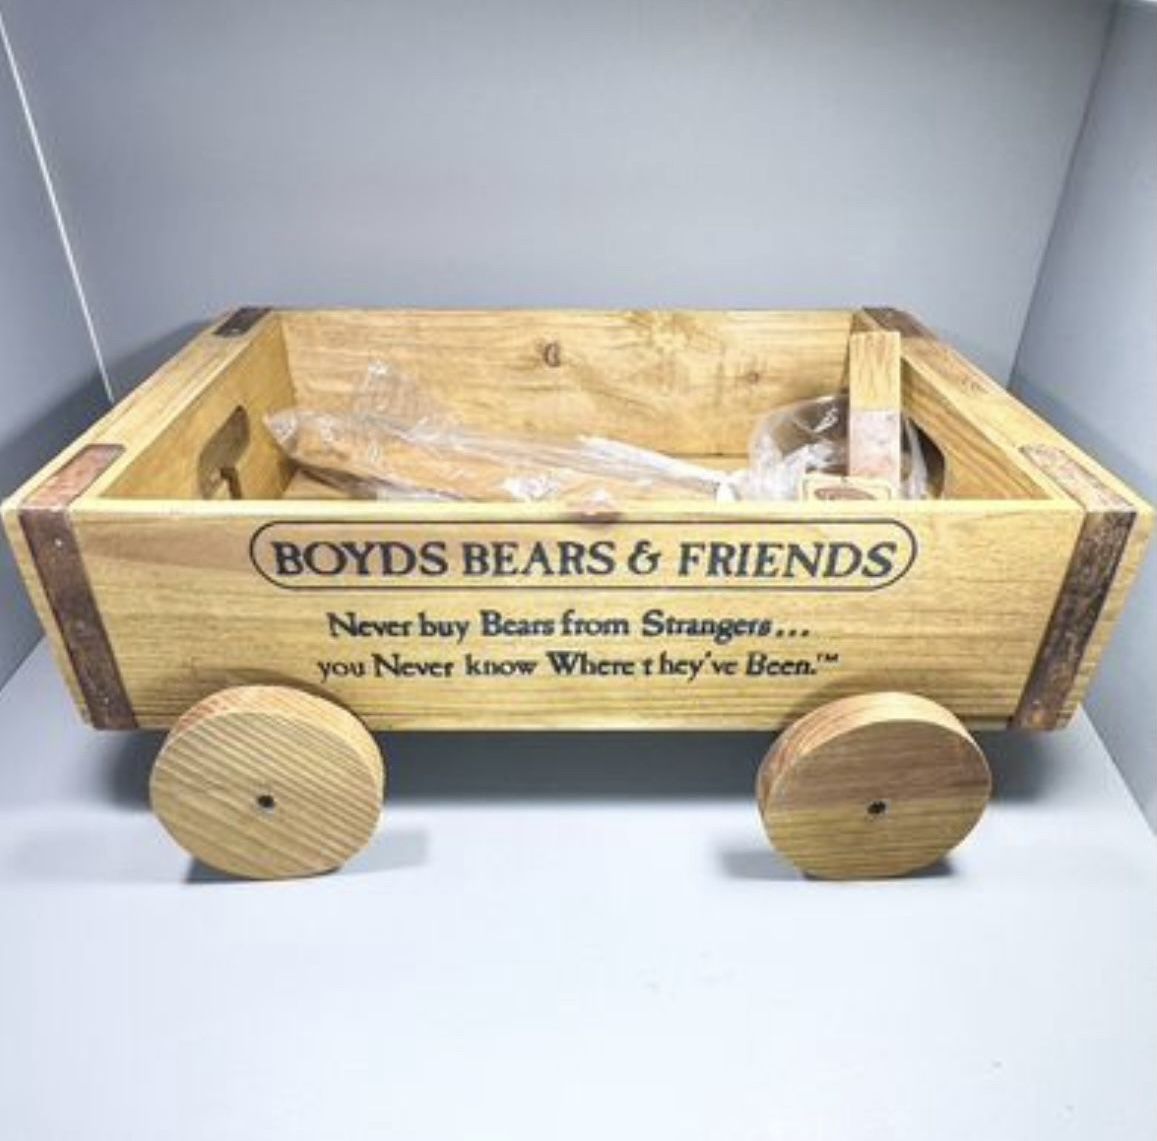 Boyds Wagon for Bears Pull Wood Large Wheels 18"